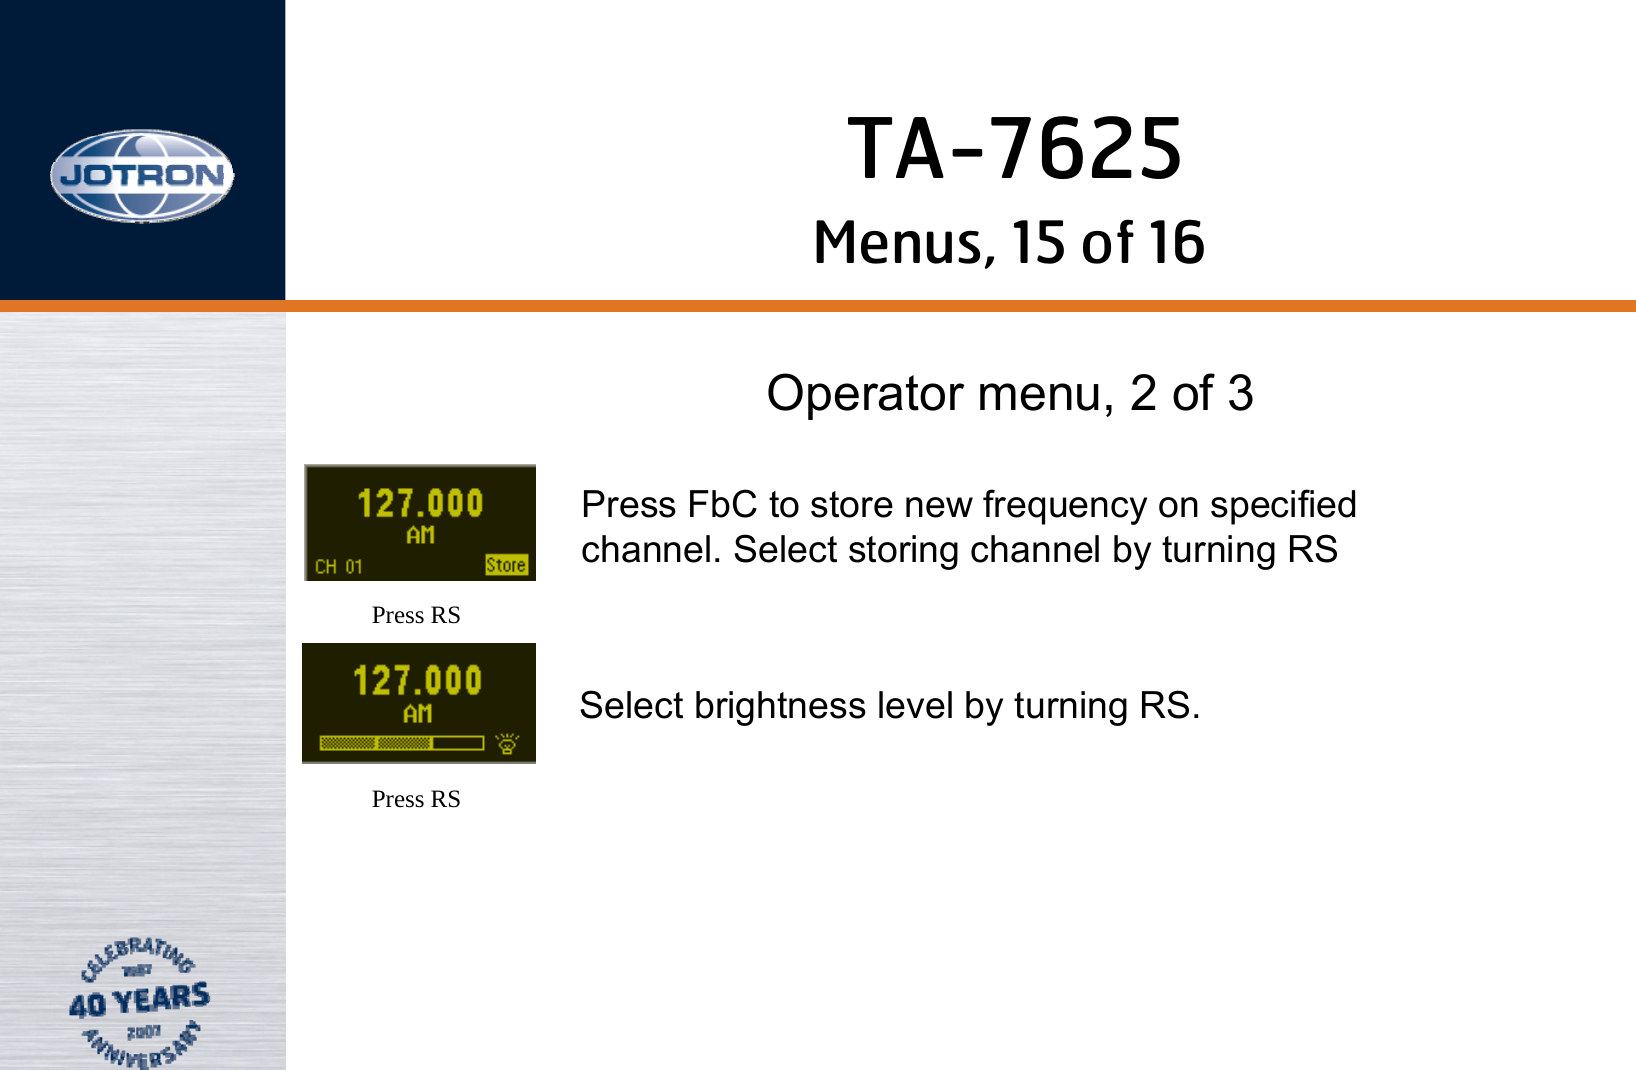 Menus, 15 of 16Operator menu, 2 of 3Press RSPress RSPress FbC to store new frequency on specified channel. Select storing channel by turning RSSelect brightness level by turning RS.TA-7625